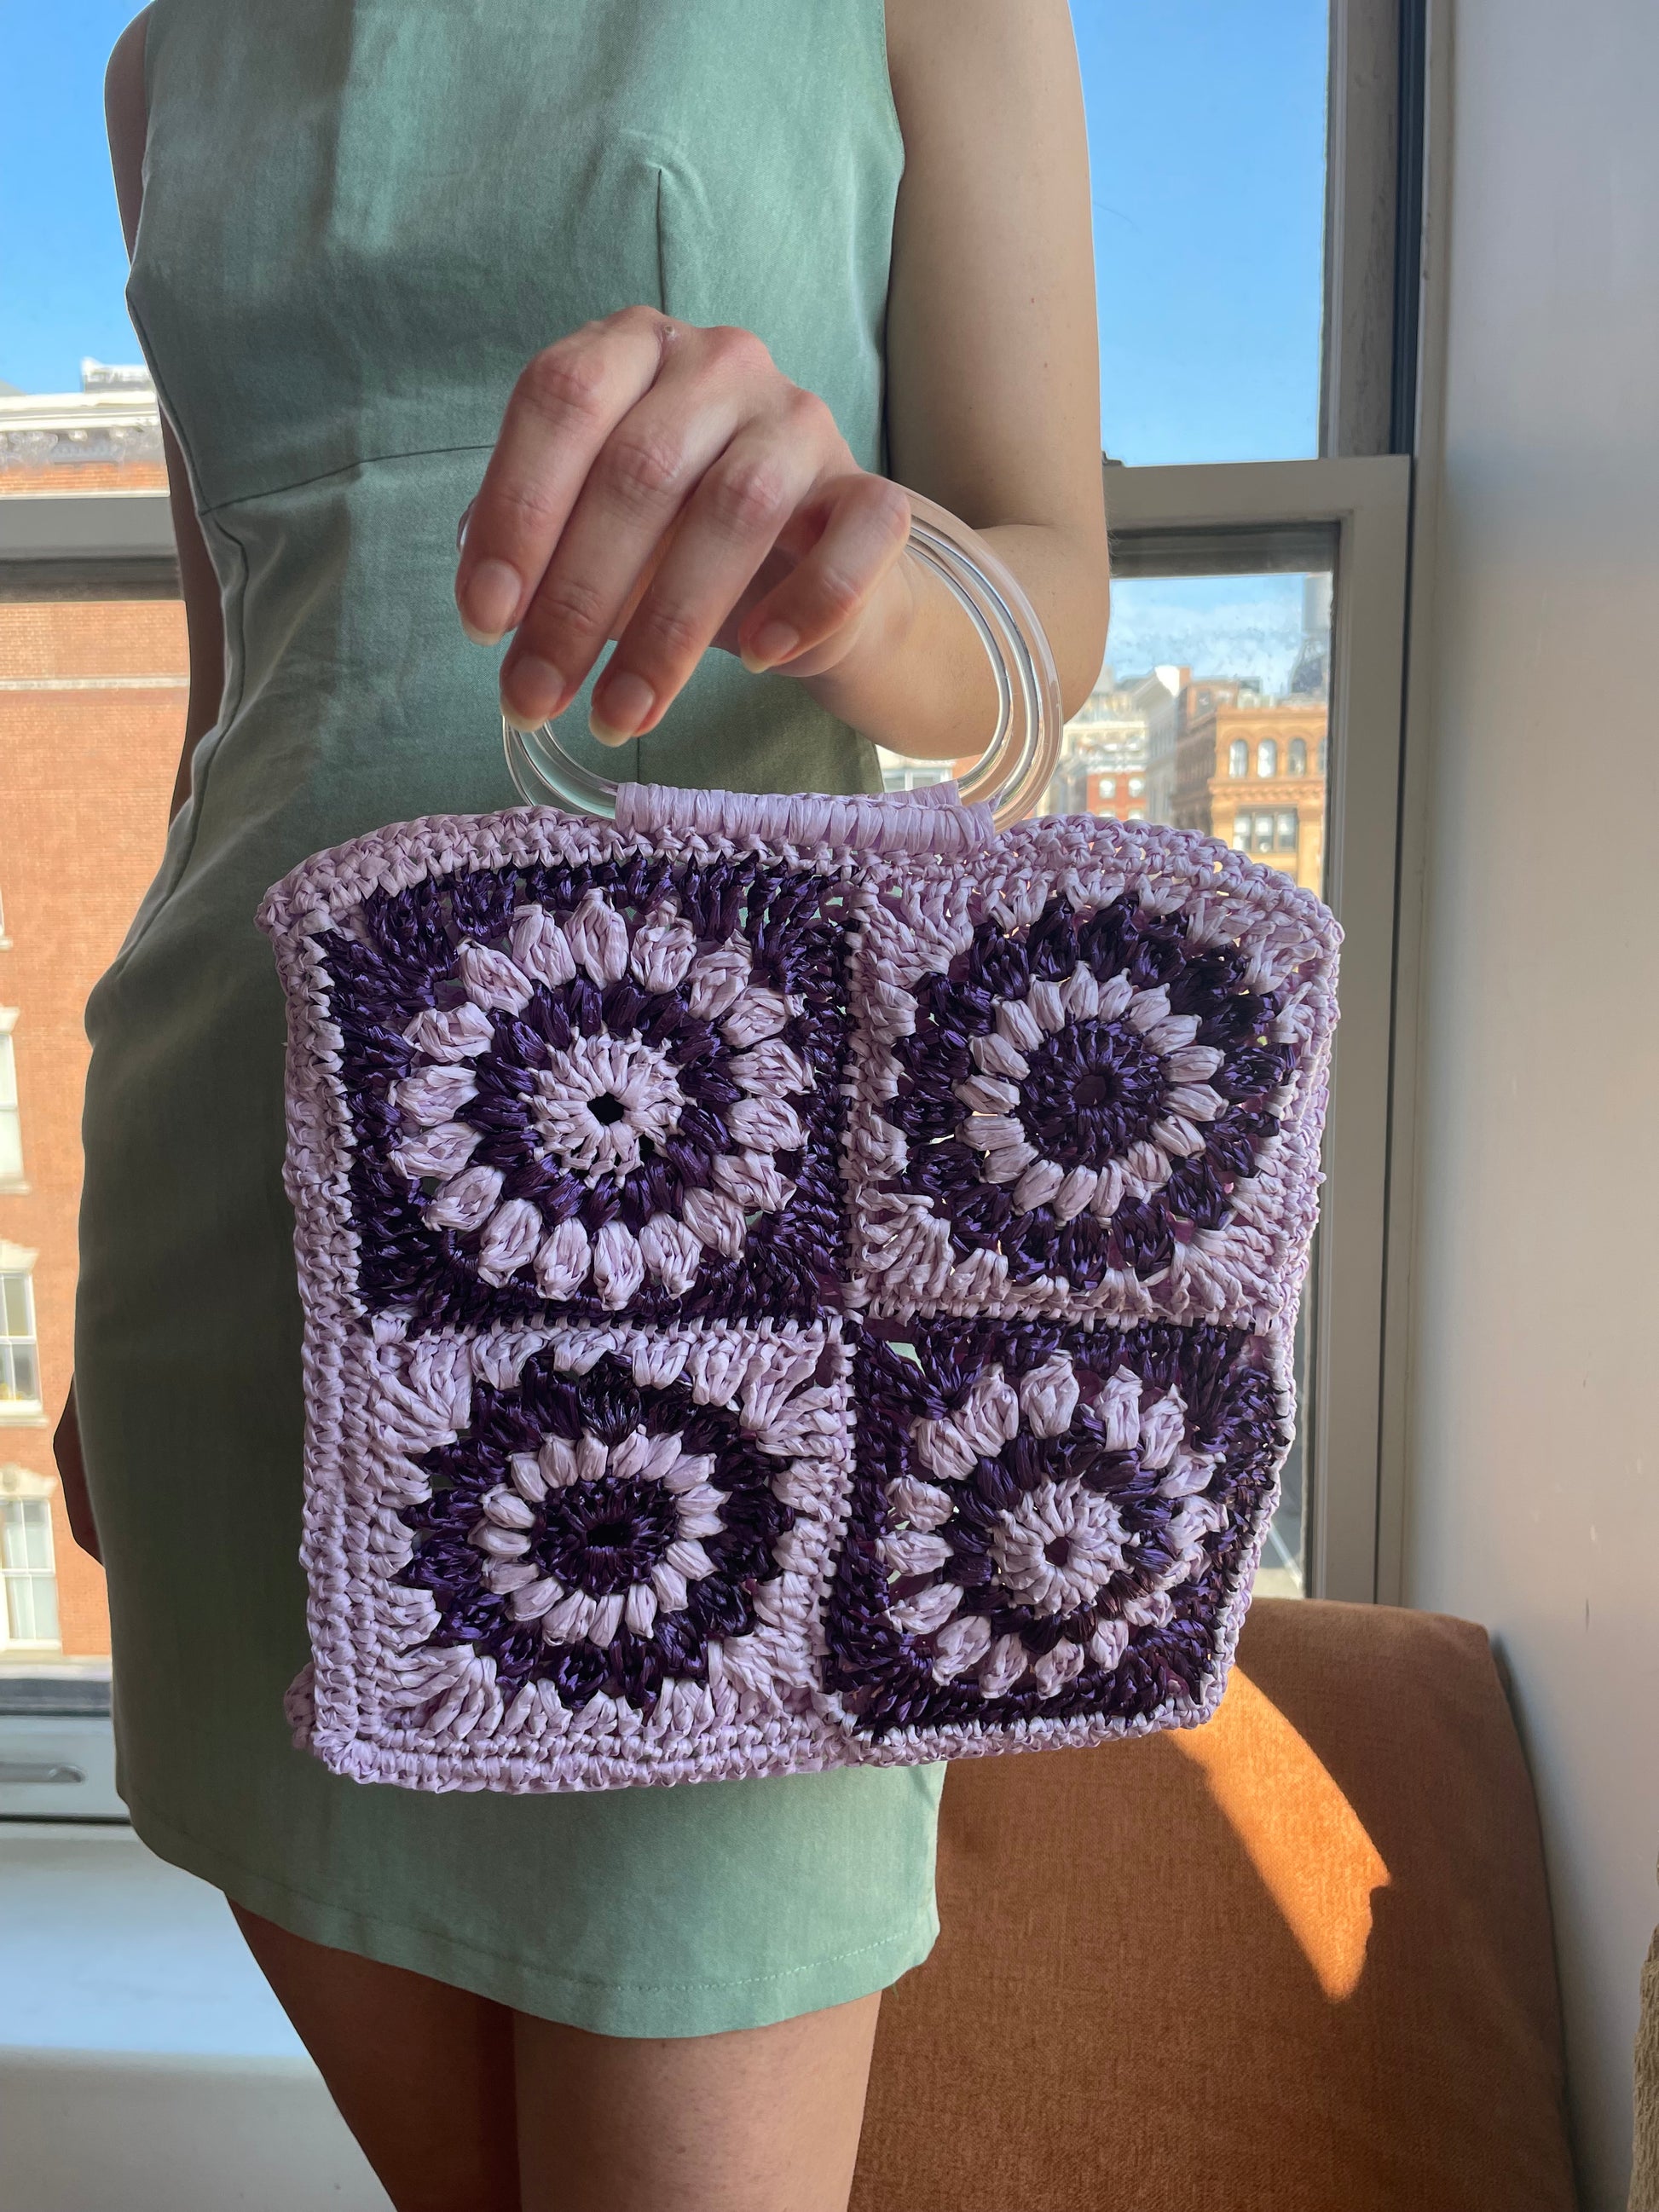 Model holding the granny square frame bag (one of the sides)